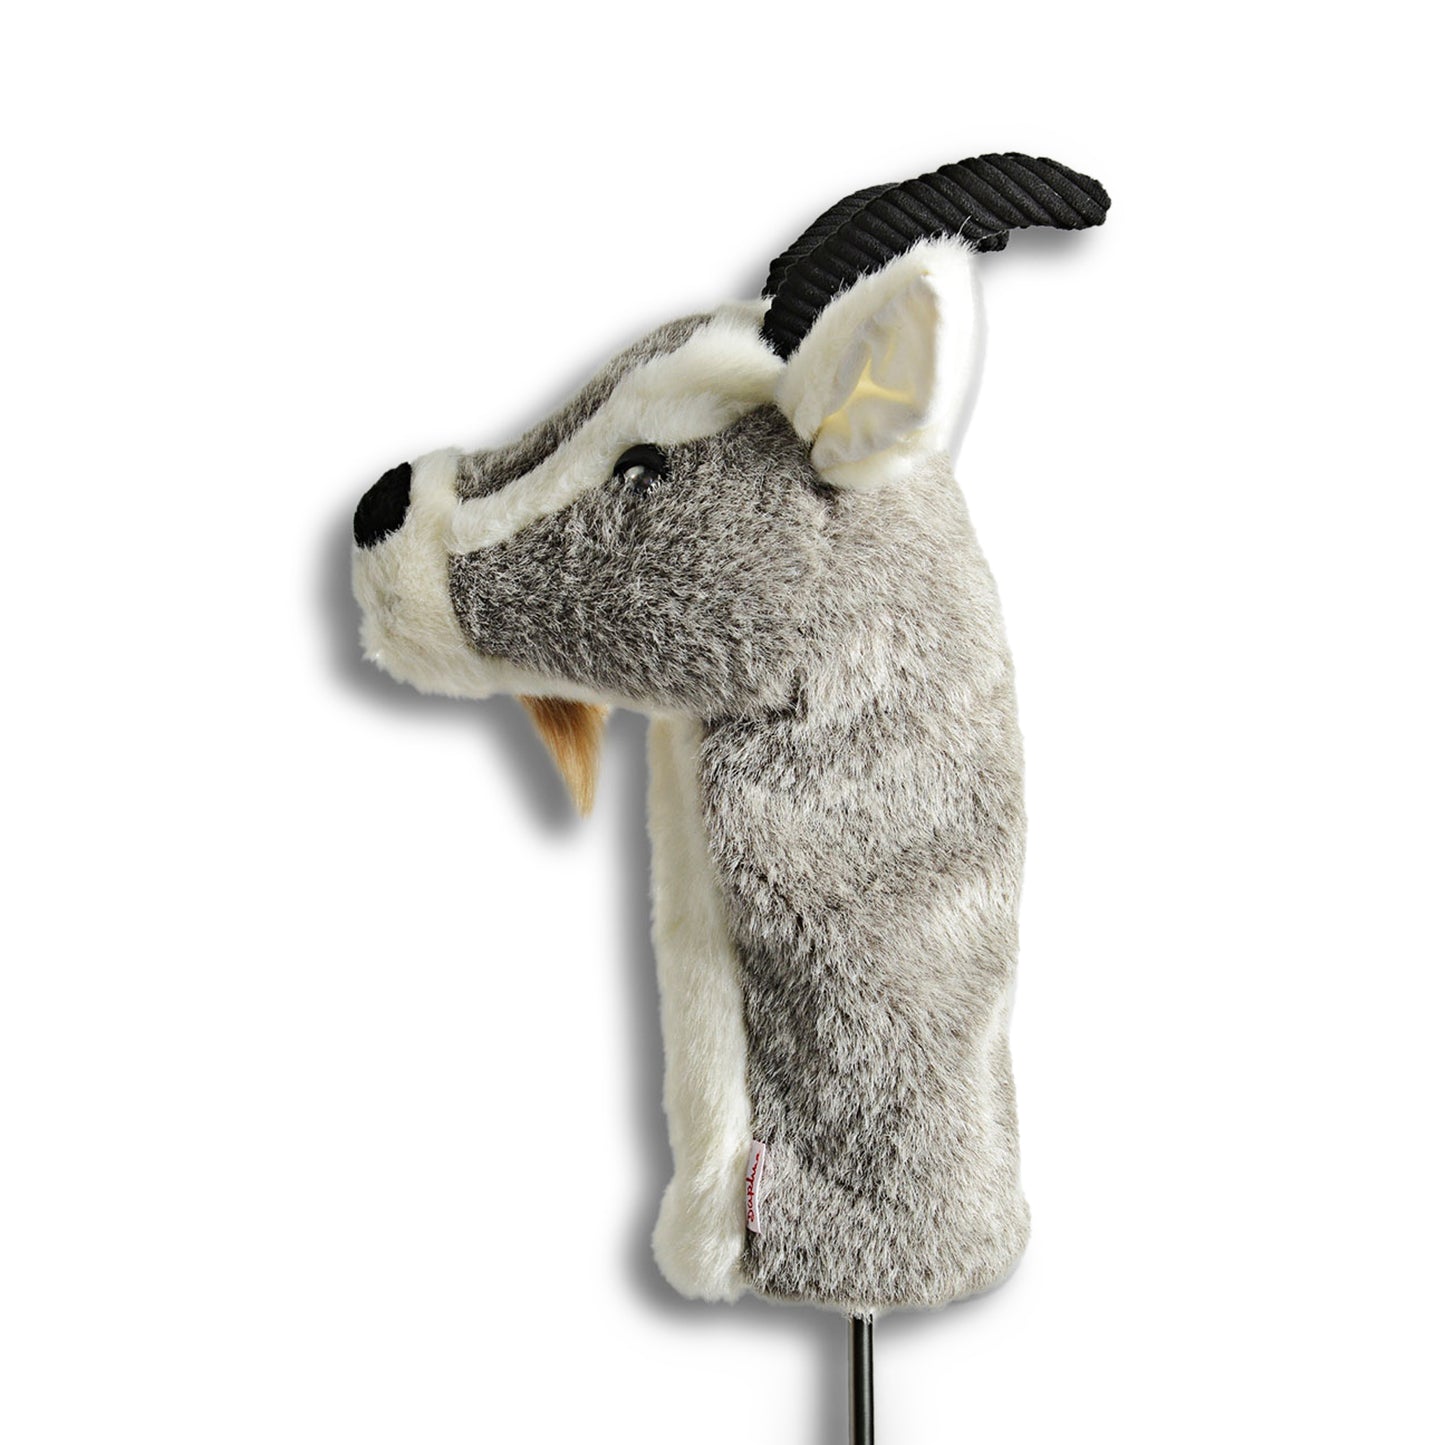 The Goat Driver Headcover